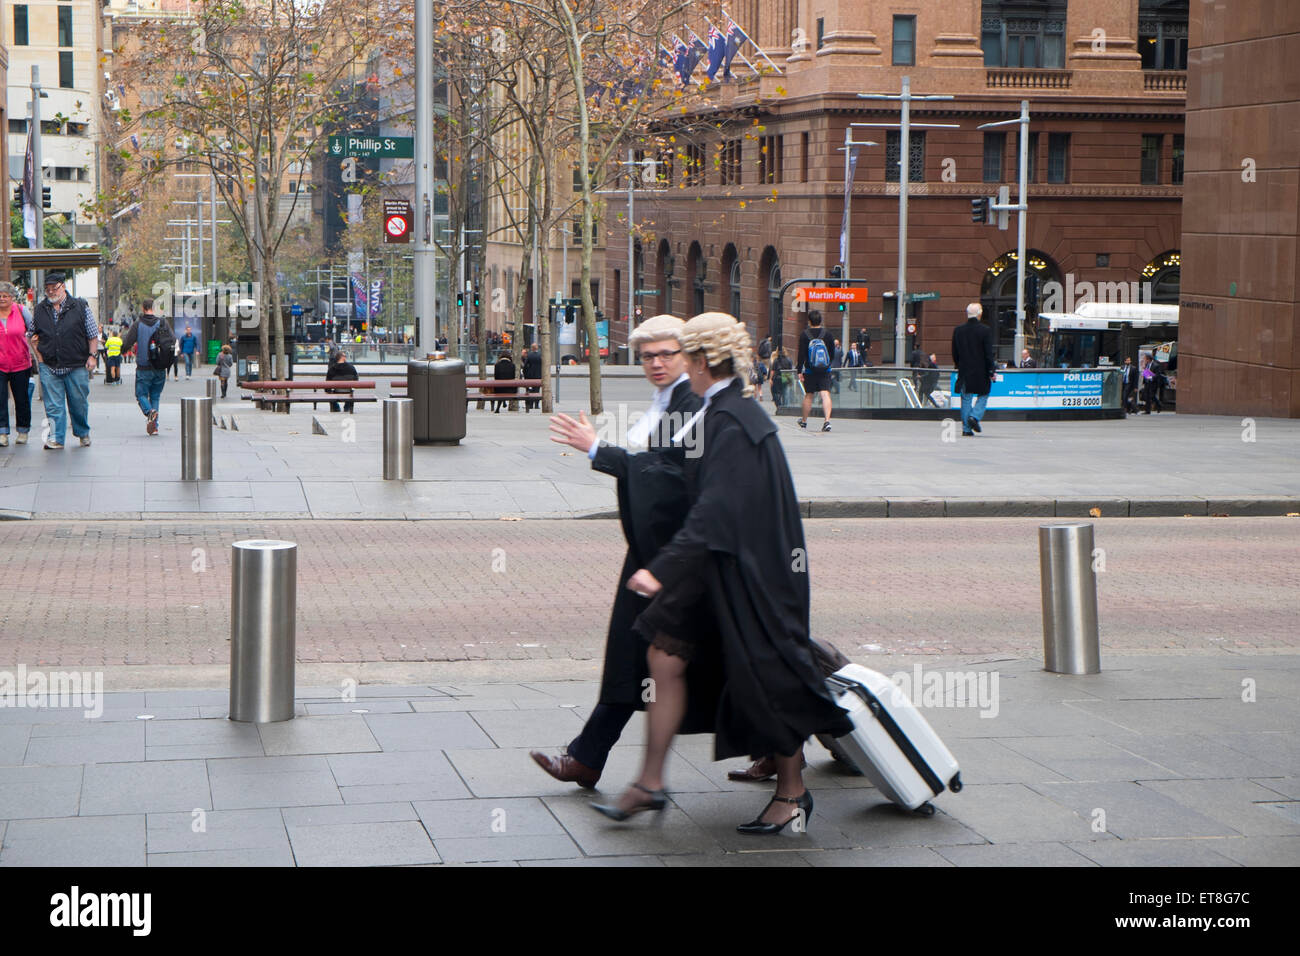 Two sydney lawyers barristers walking through Sydney city centre on way to court, new south wales,australia Stock Photo